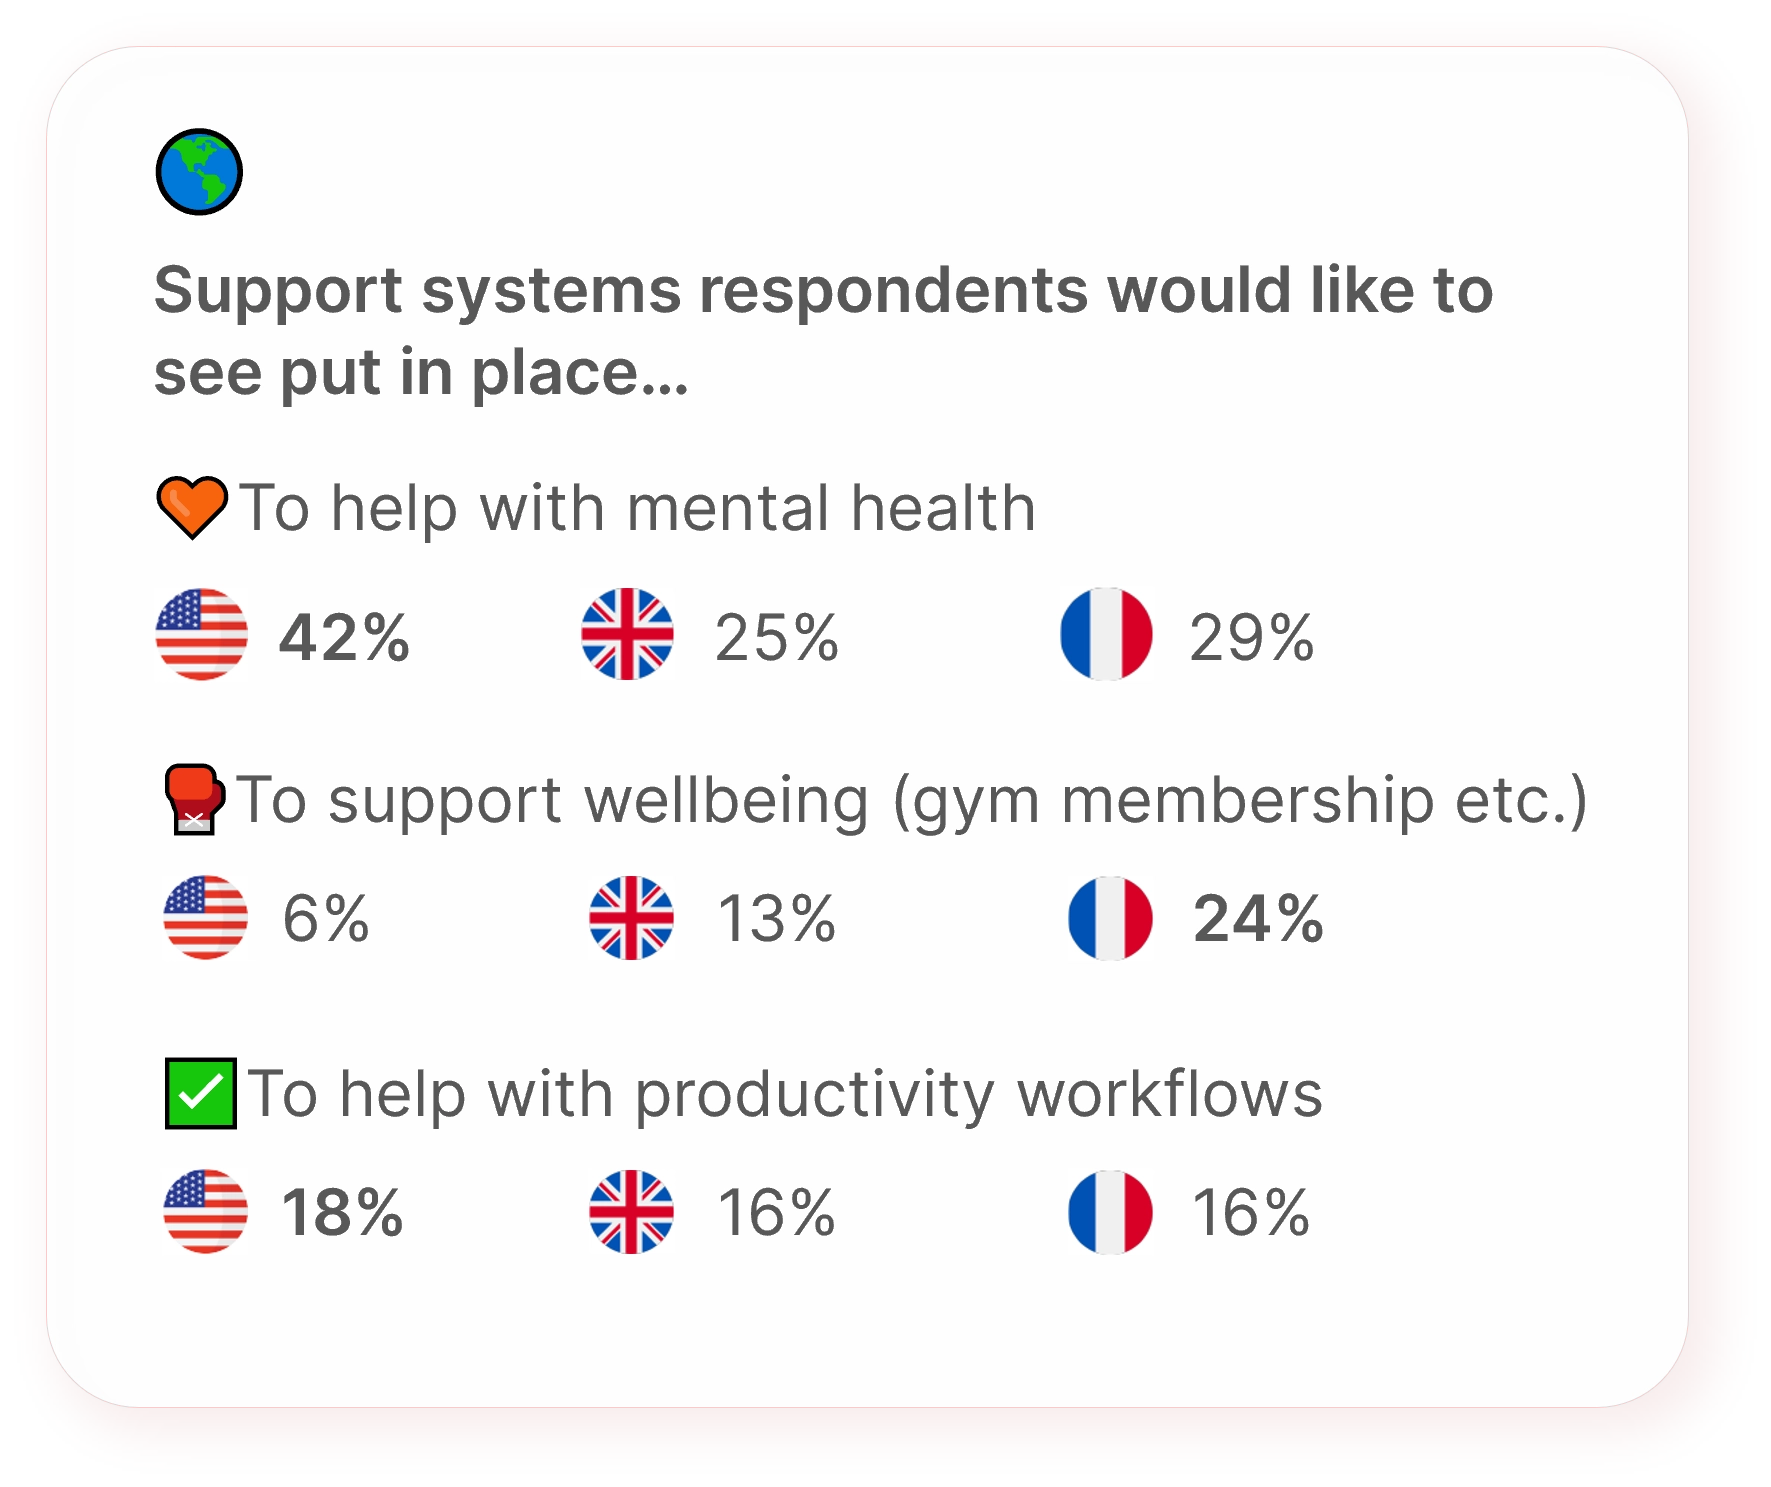 Infographic showing the support systems that bankers would like to have implemented